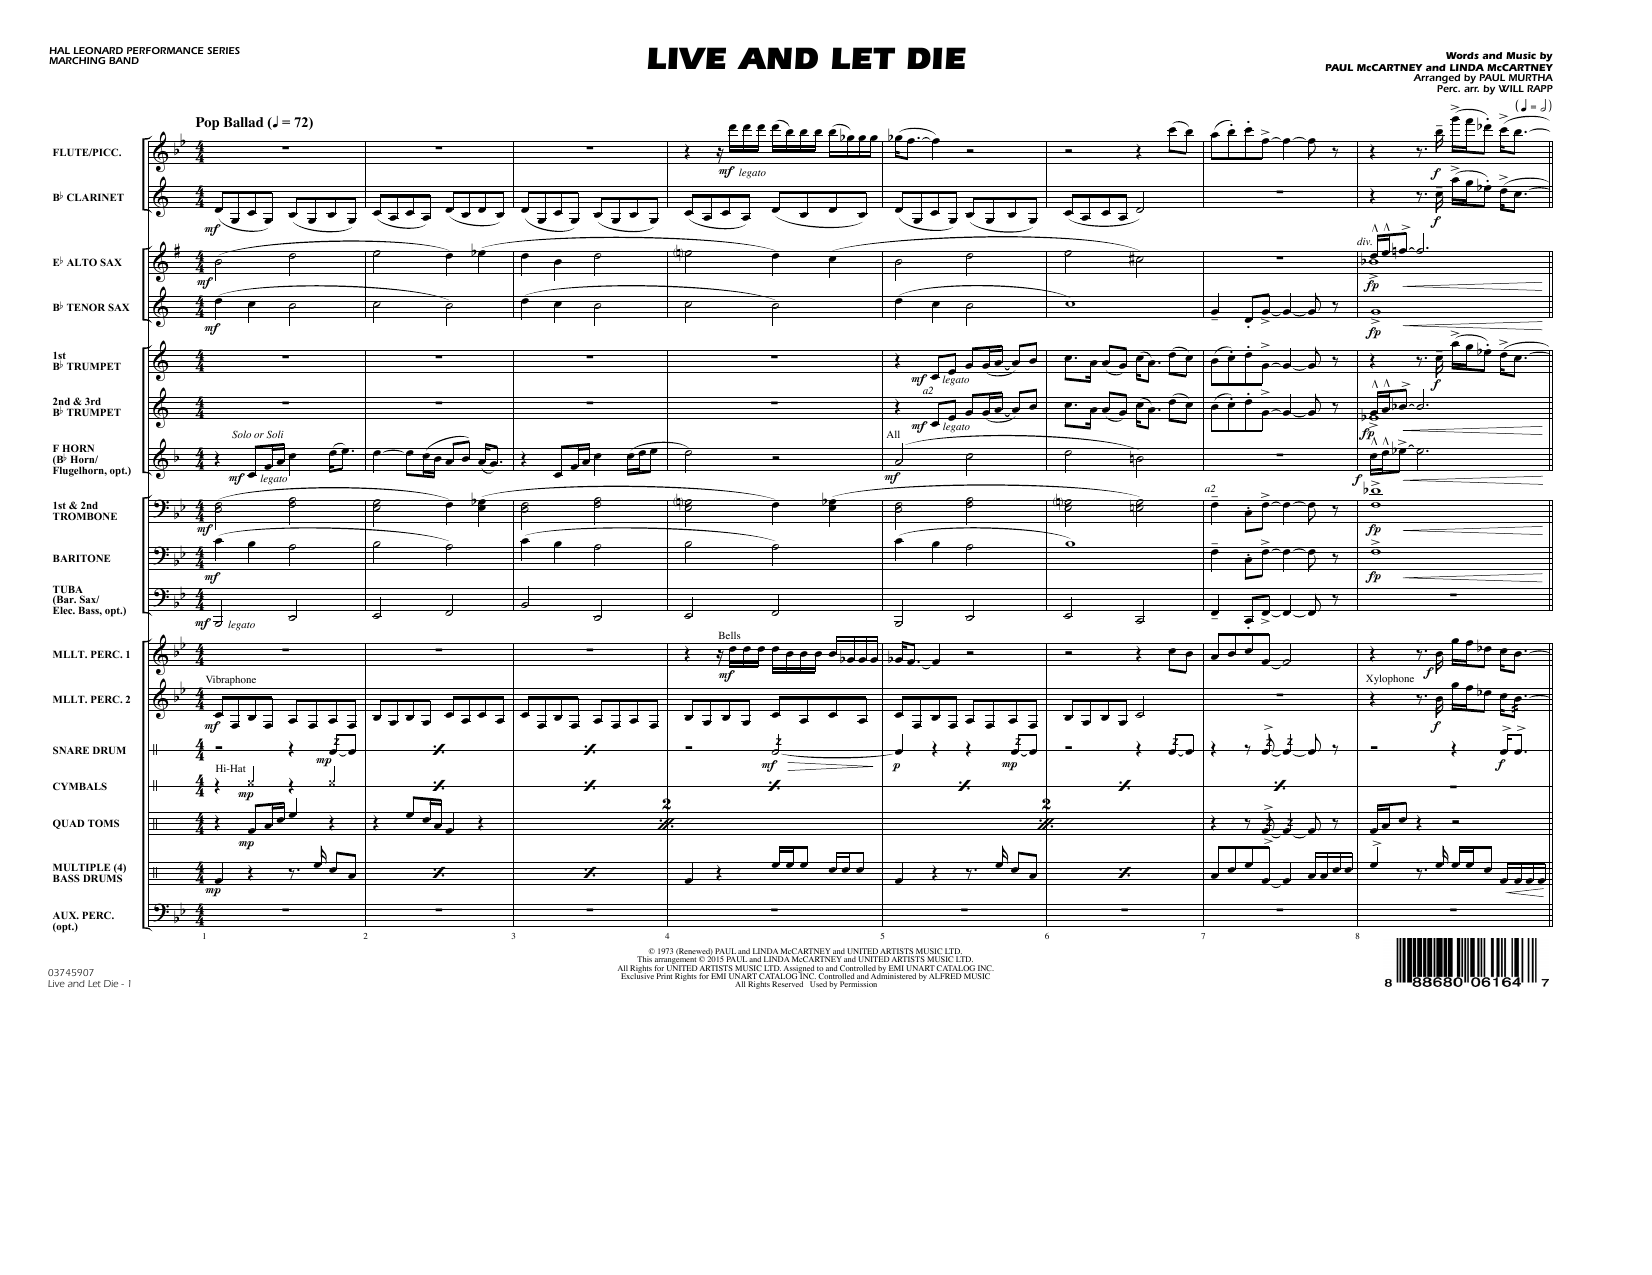 Download Paul Murtha Live and Let Die - Conductor Score (Ful Sheet Music